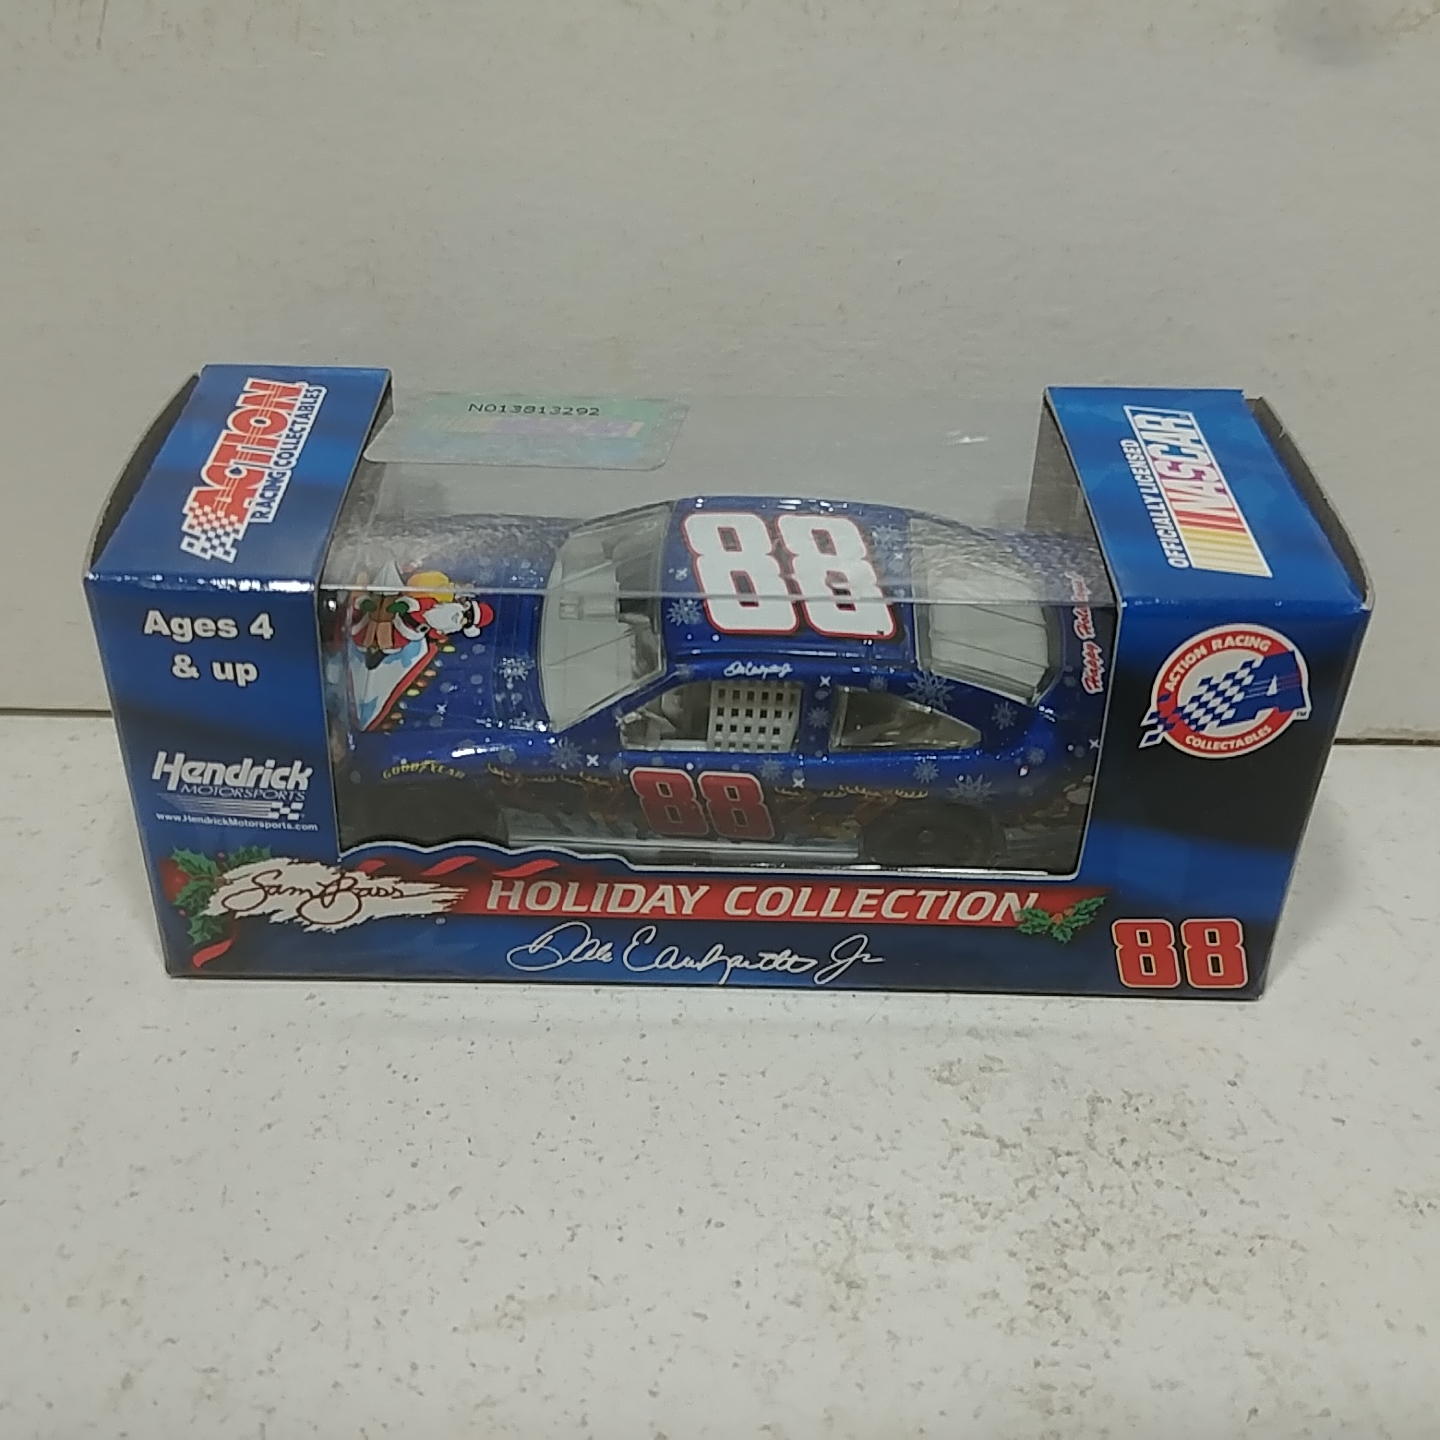 2008 Dale Earnhardt Jr 1/64th "Sam Bass Holiday" Pitstop Series car